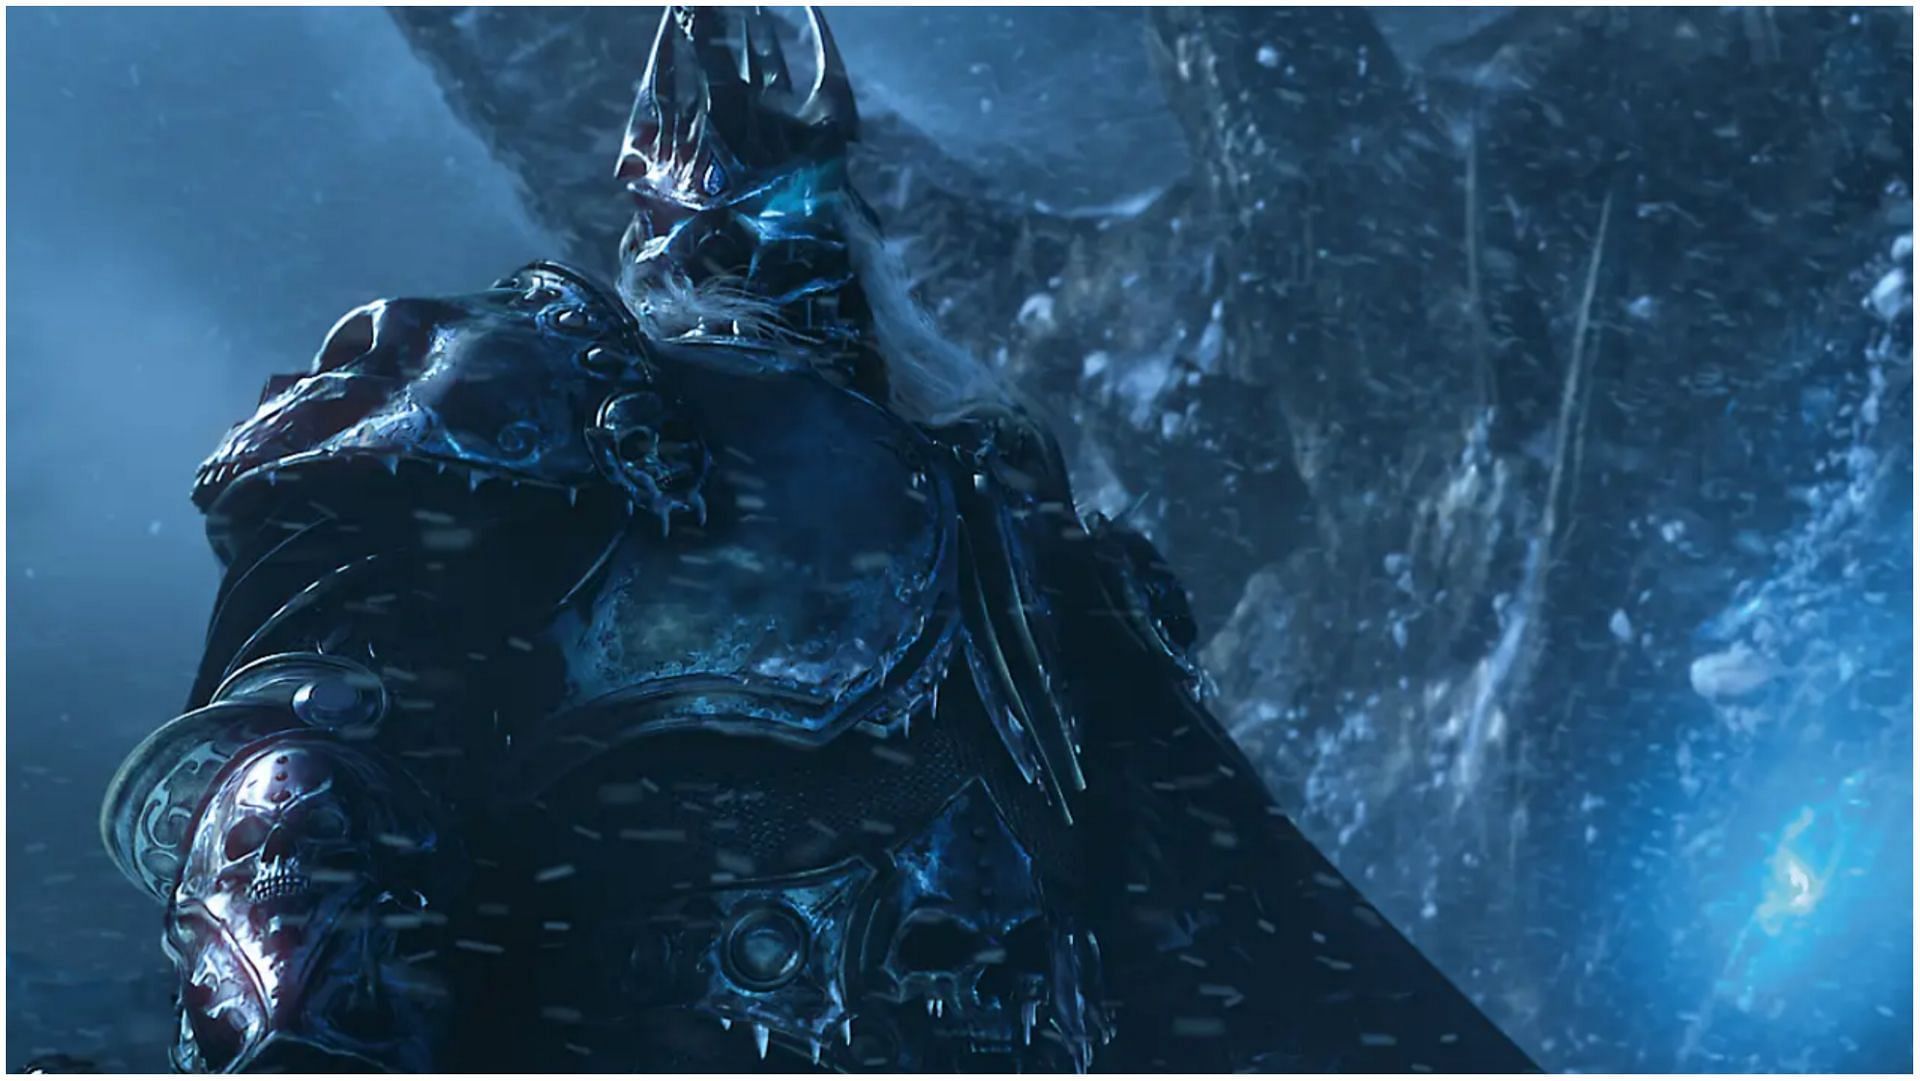 WoW Classic: Wrath of the Lich King is here, and here are some changes to be aware of (Image via Blizzard Entertainment)